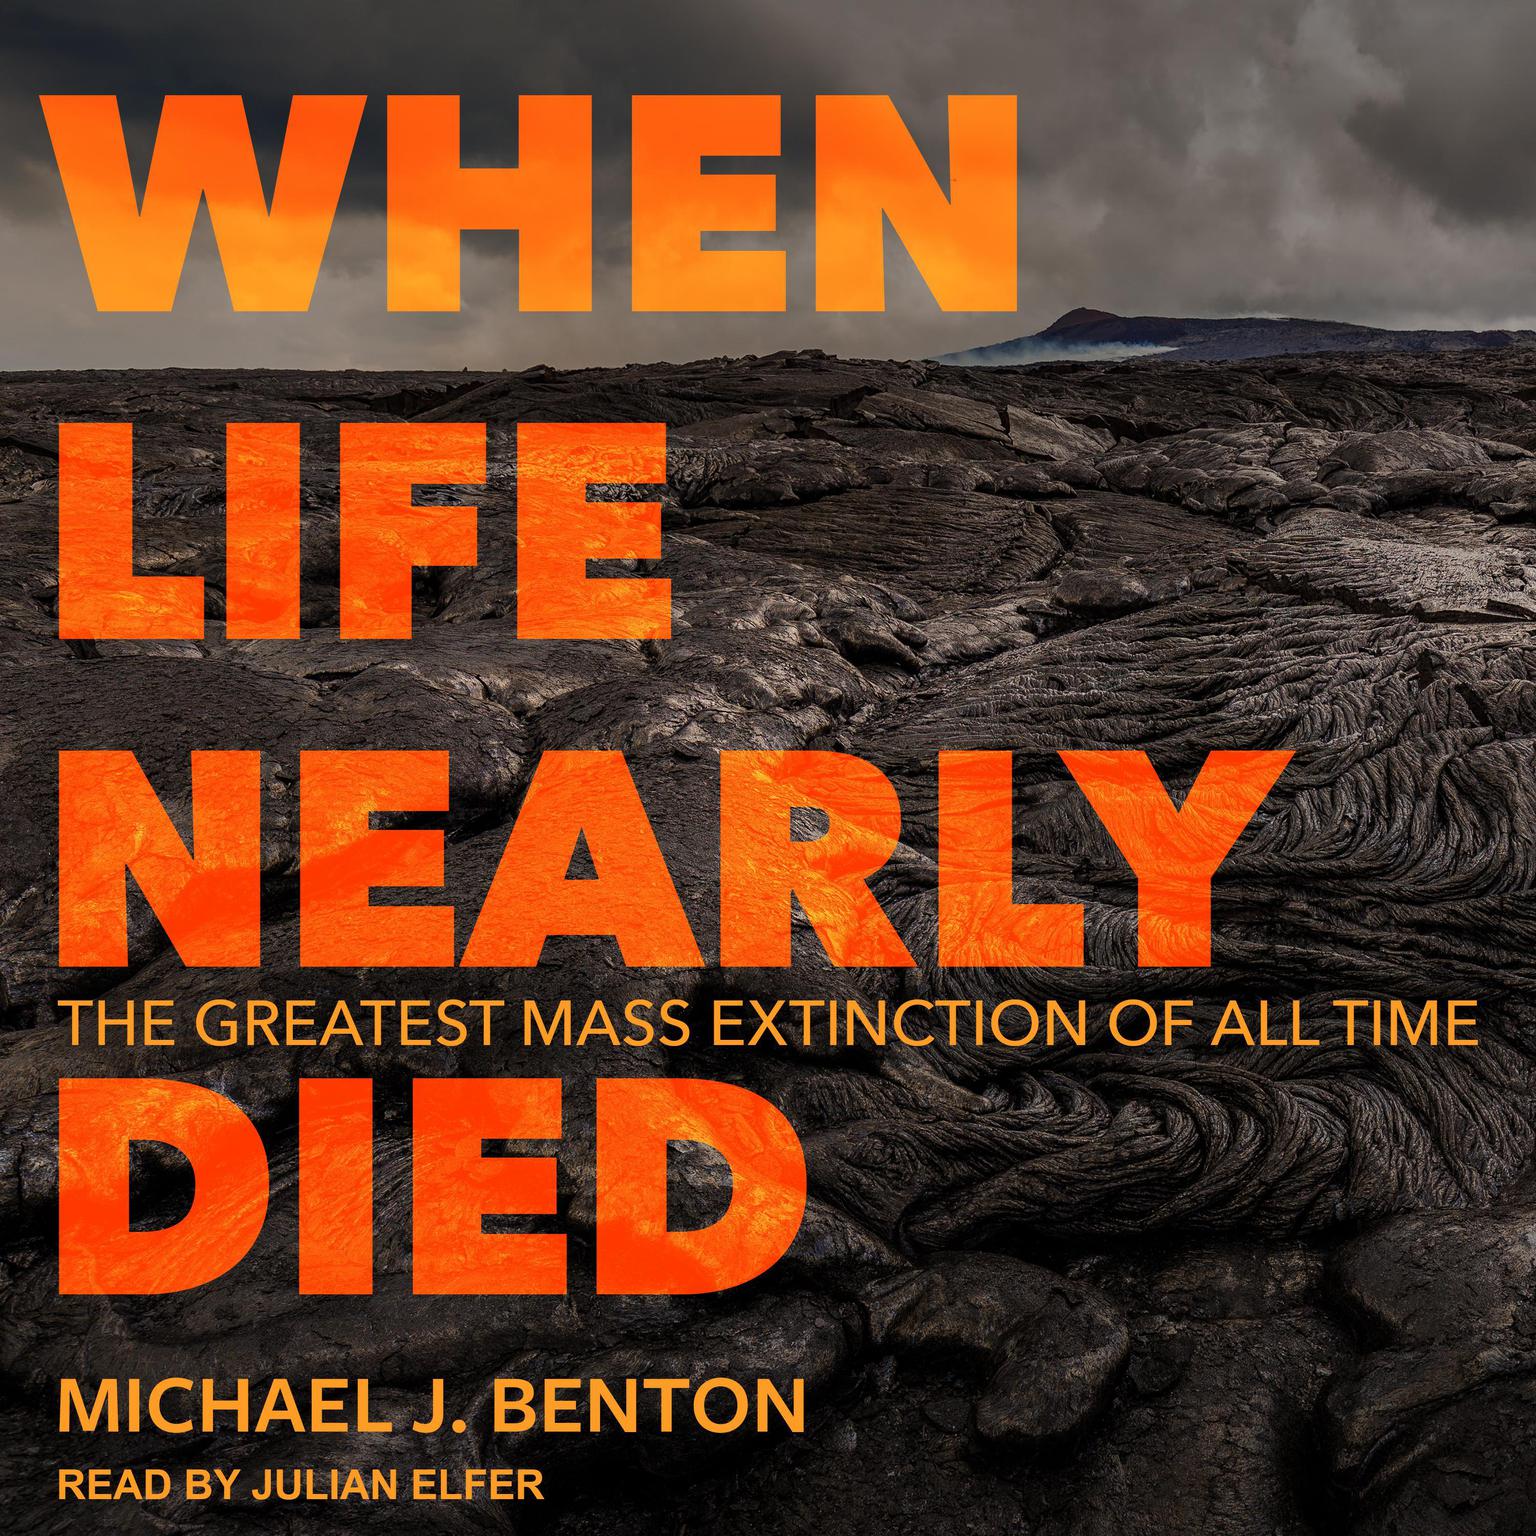 When Life Nearly Died: The Greatest Mass Extinction of All Time Audiobook, by Michael J. Benton